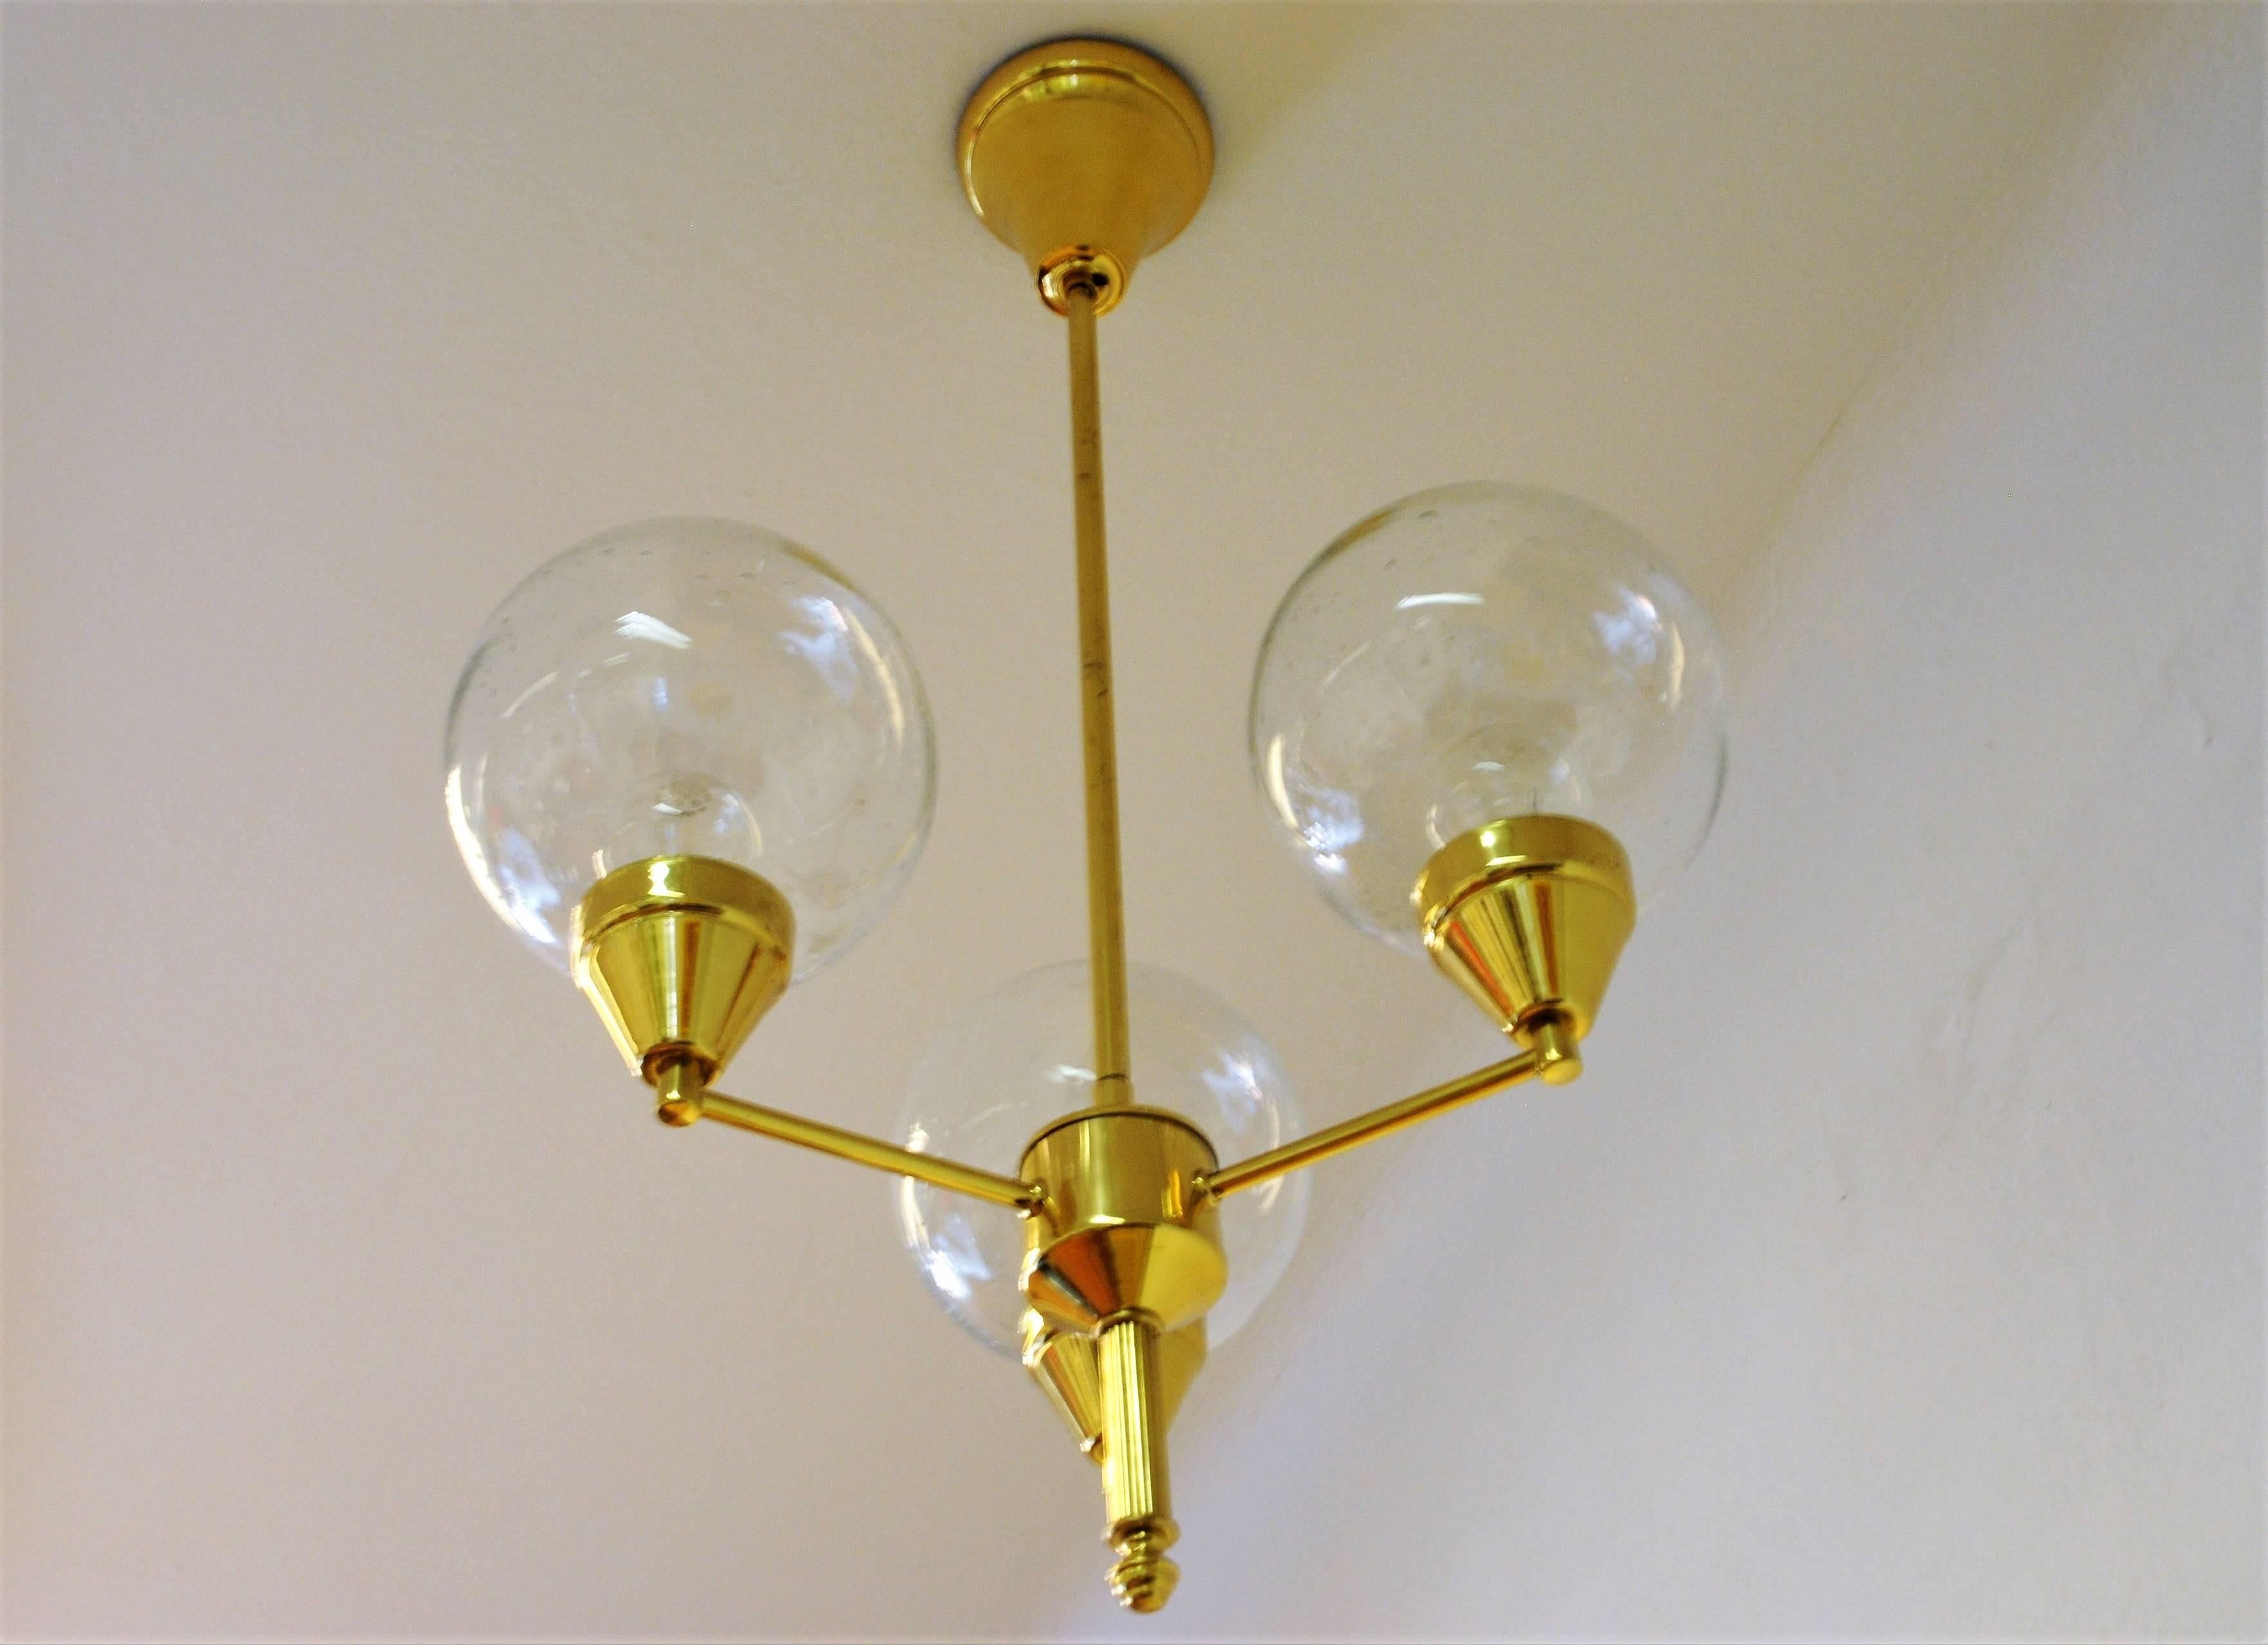 Ceiling lamp of brass and with three clear glass domes in upward position. Probably a Swedish lamp from around the 1960s. The glass domes have small enclosed airbubbles and are just to be put down in the glassdome holders. No screws needed. Size: 45